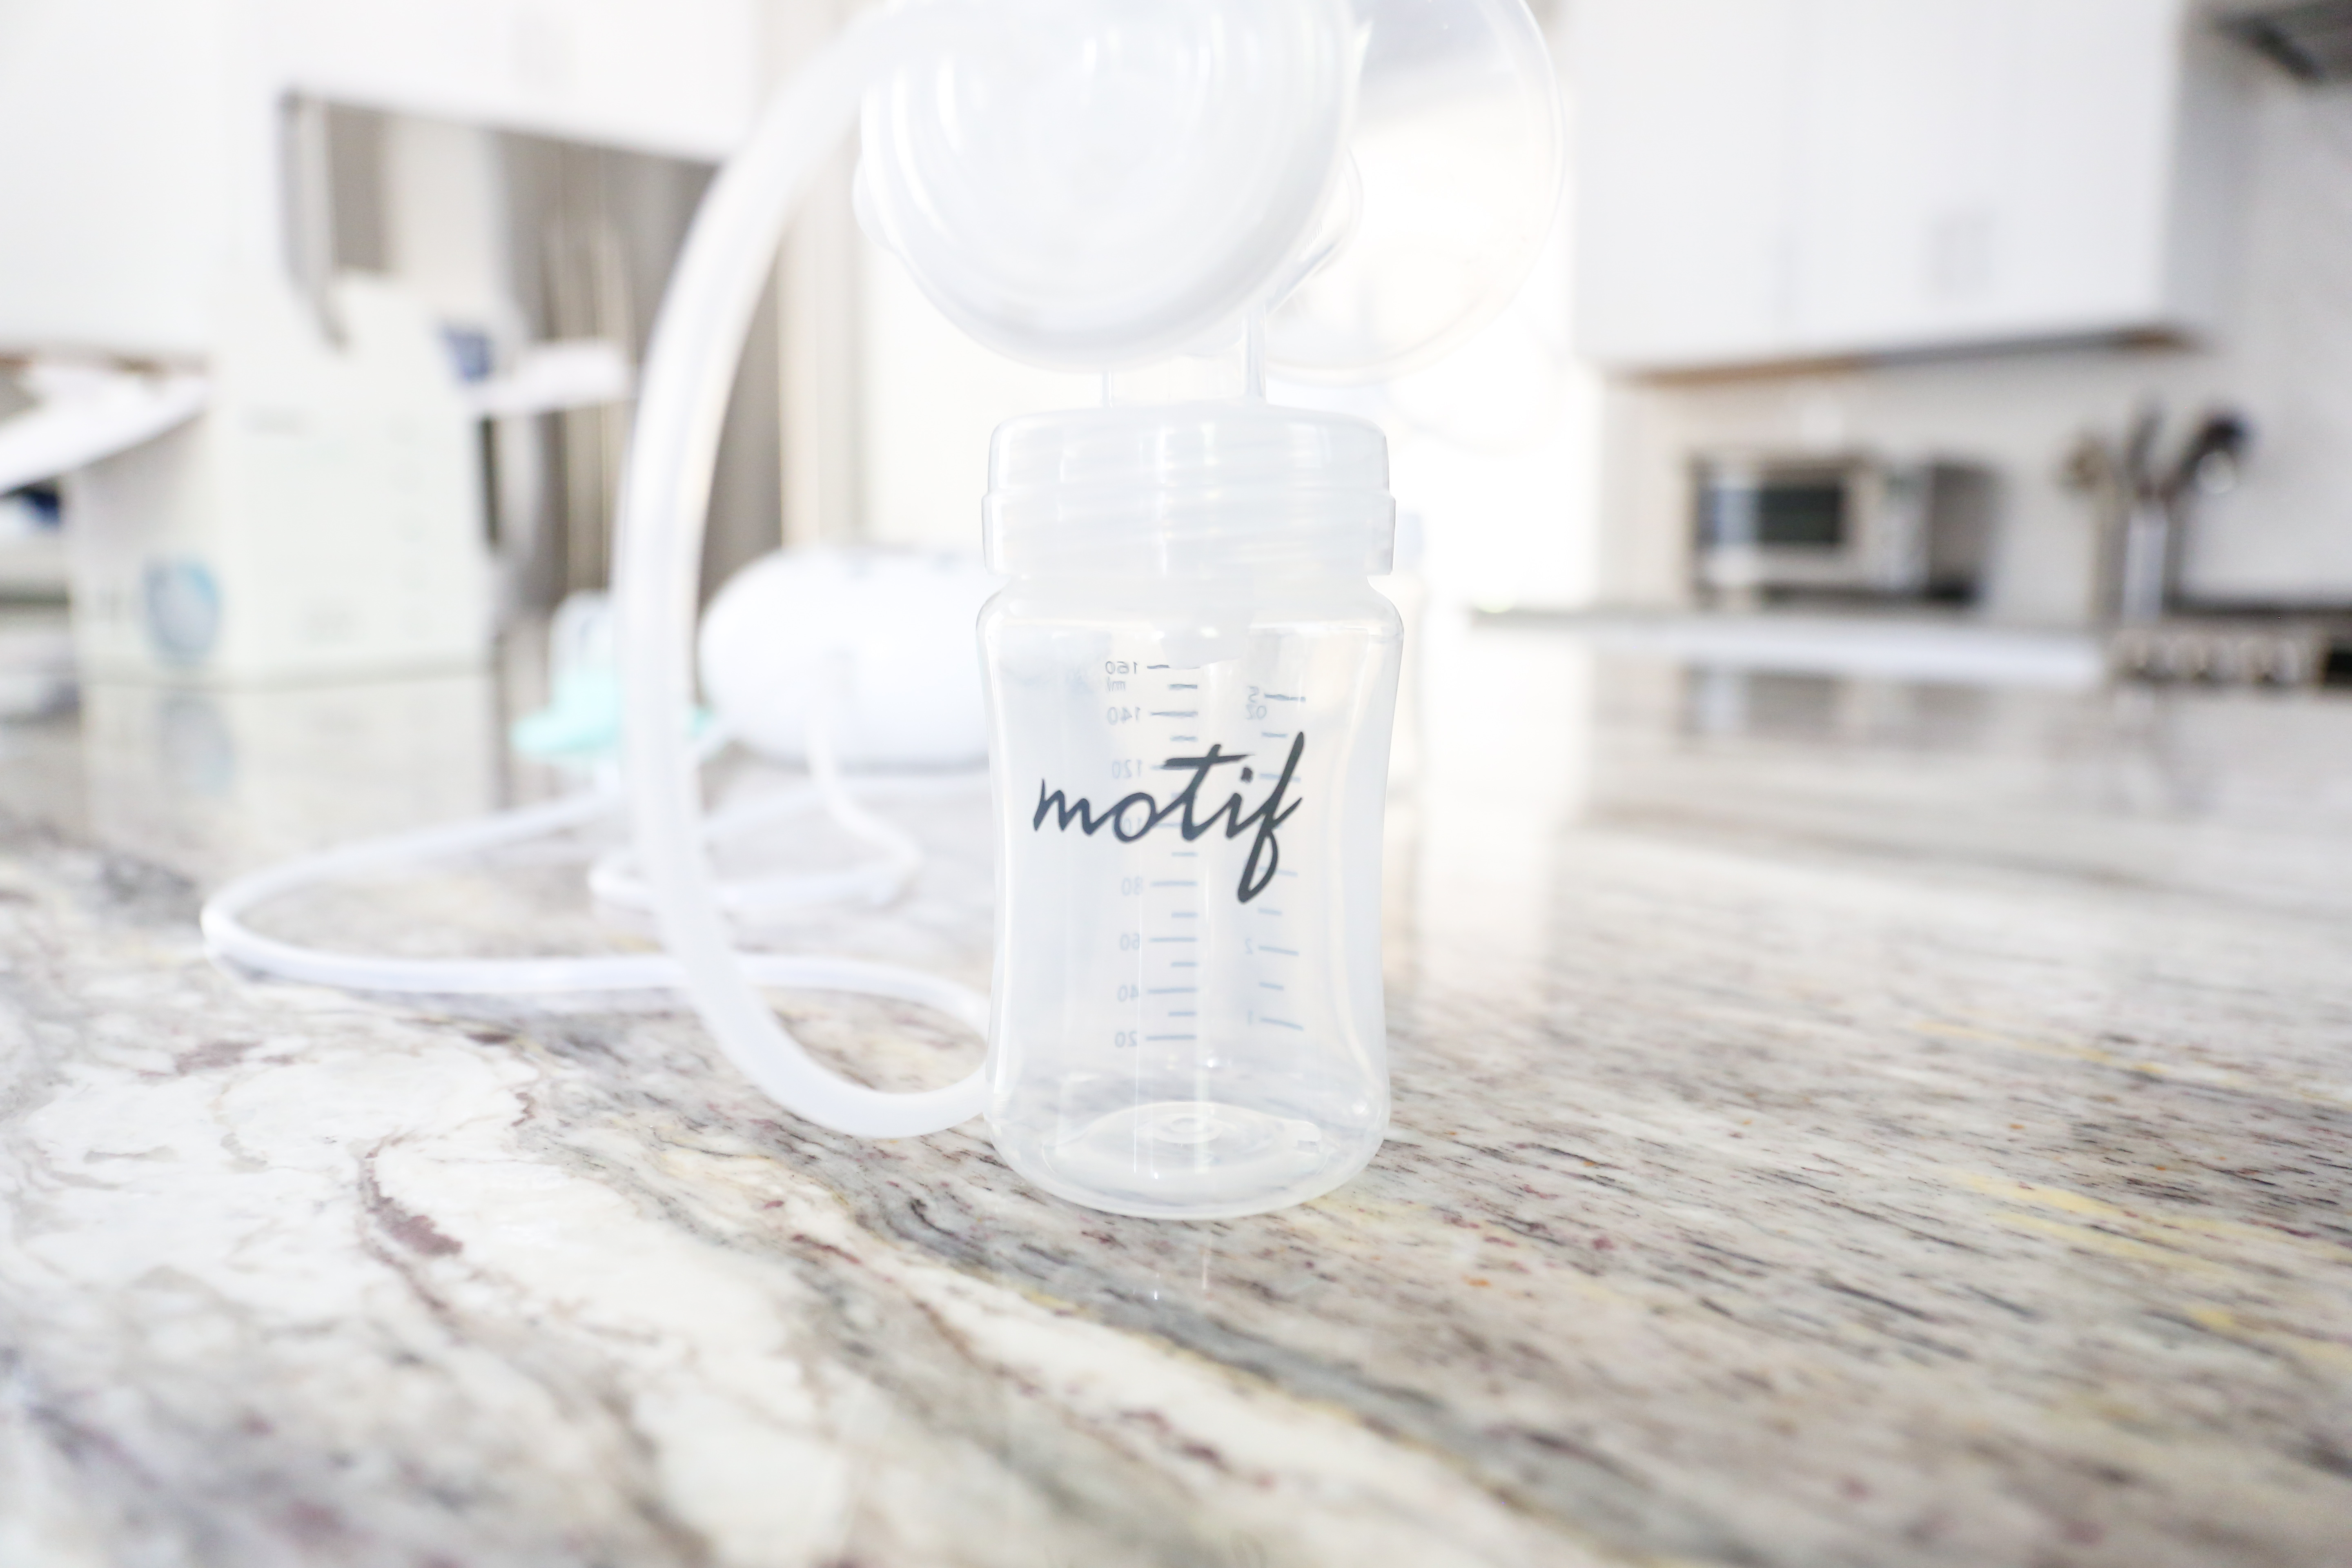 See what Consumer Reports has to say about the Motif Luna! 🍼 Link in bio  to learn more.